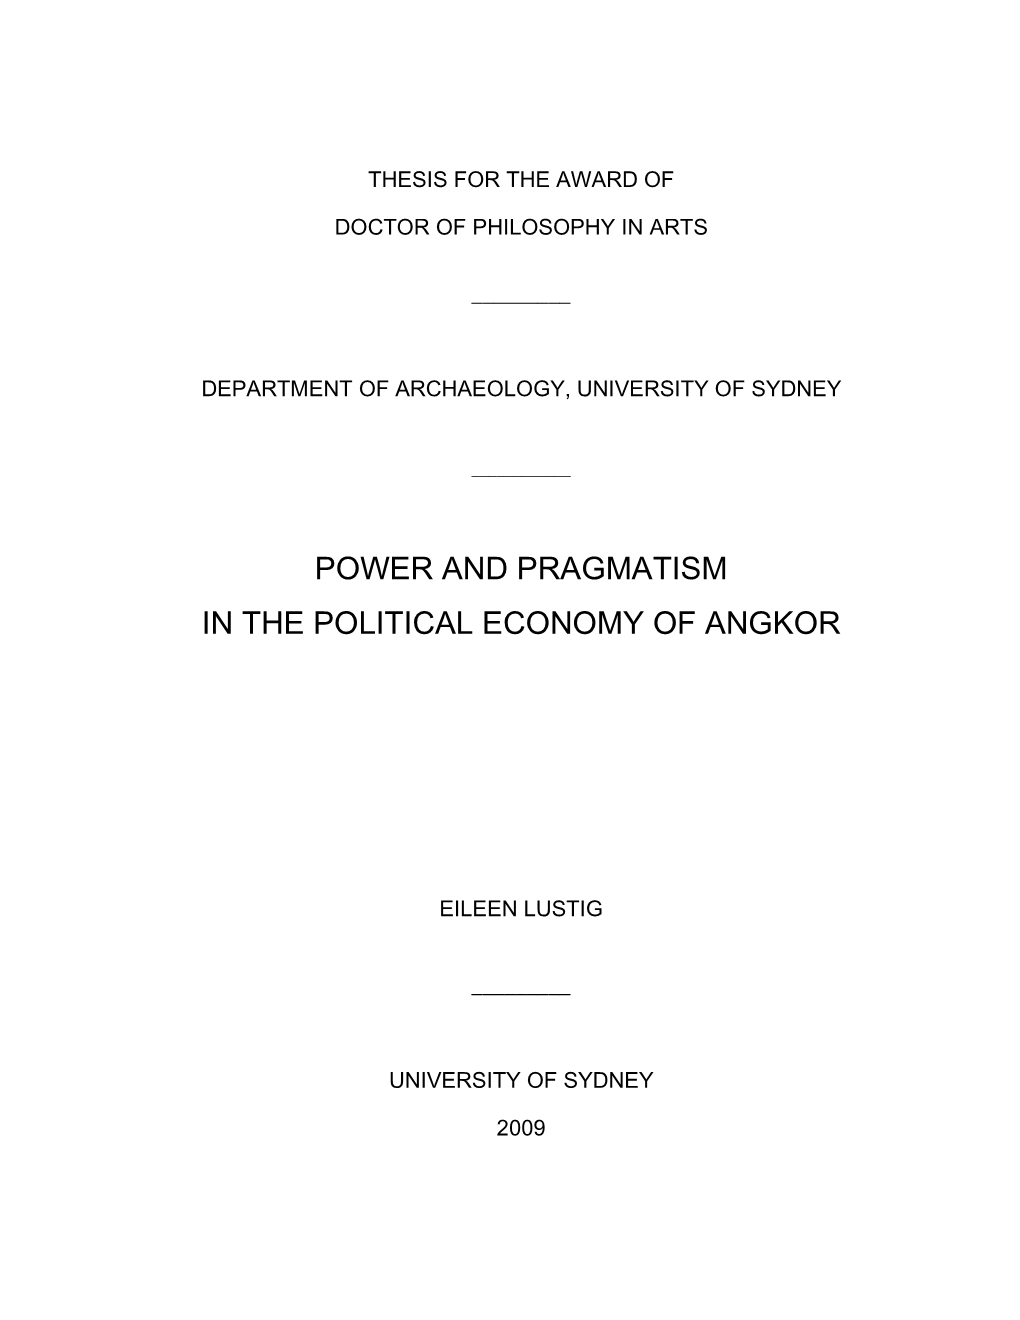 Power and Pragmatism in the Political Economy of Angkor